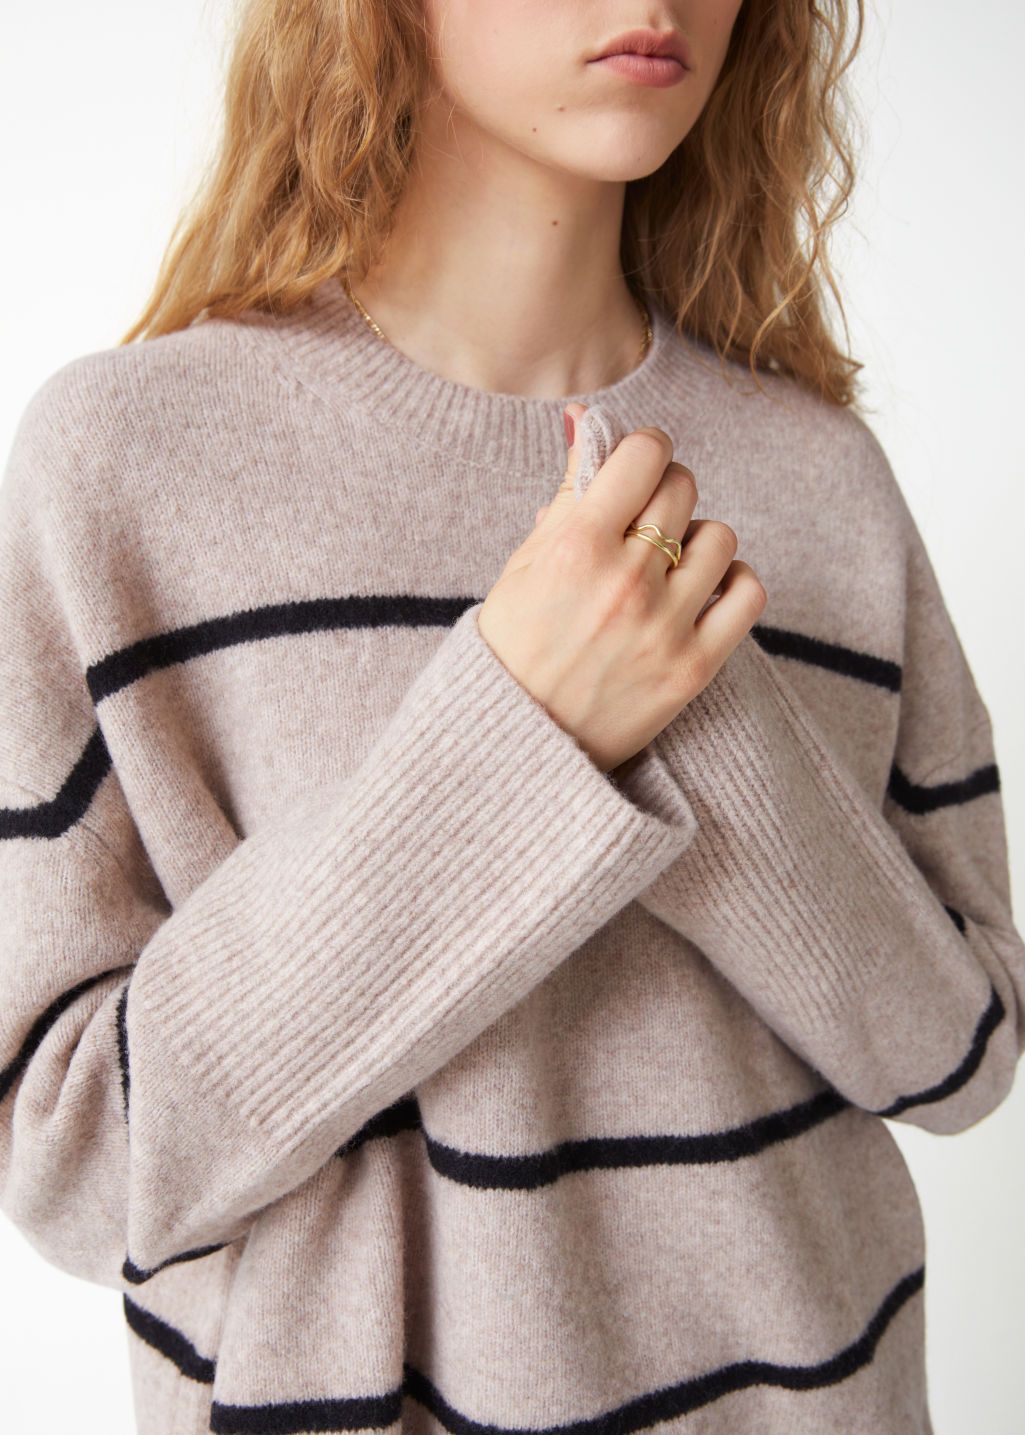 Striped Knit Sweater | & Other Stories US